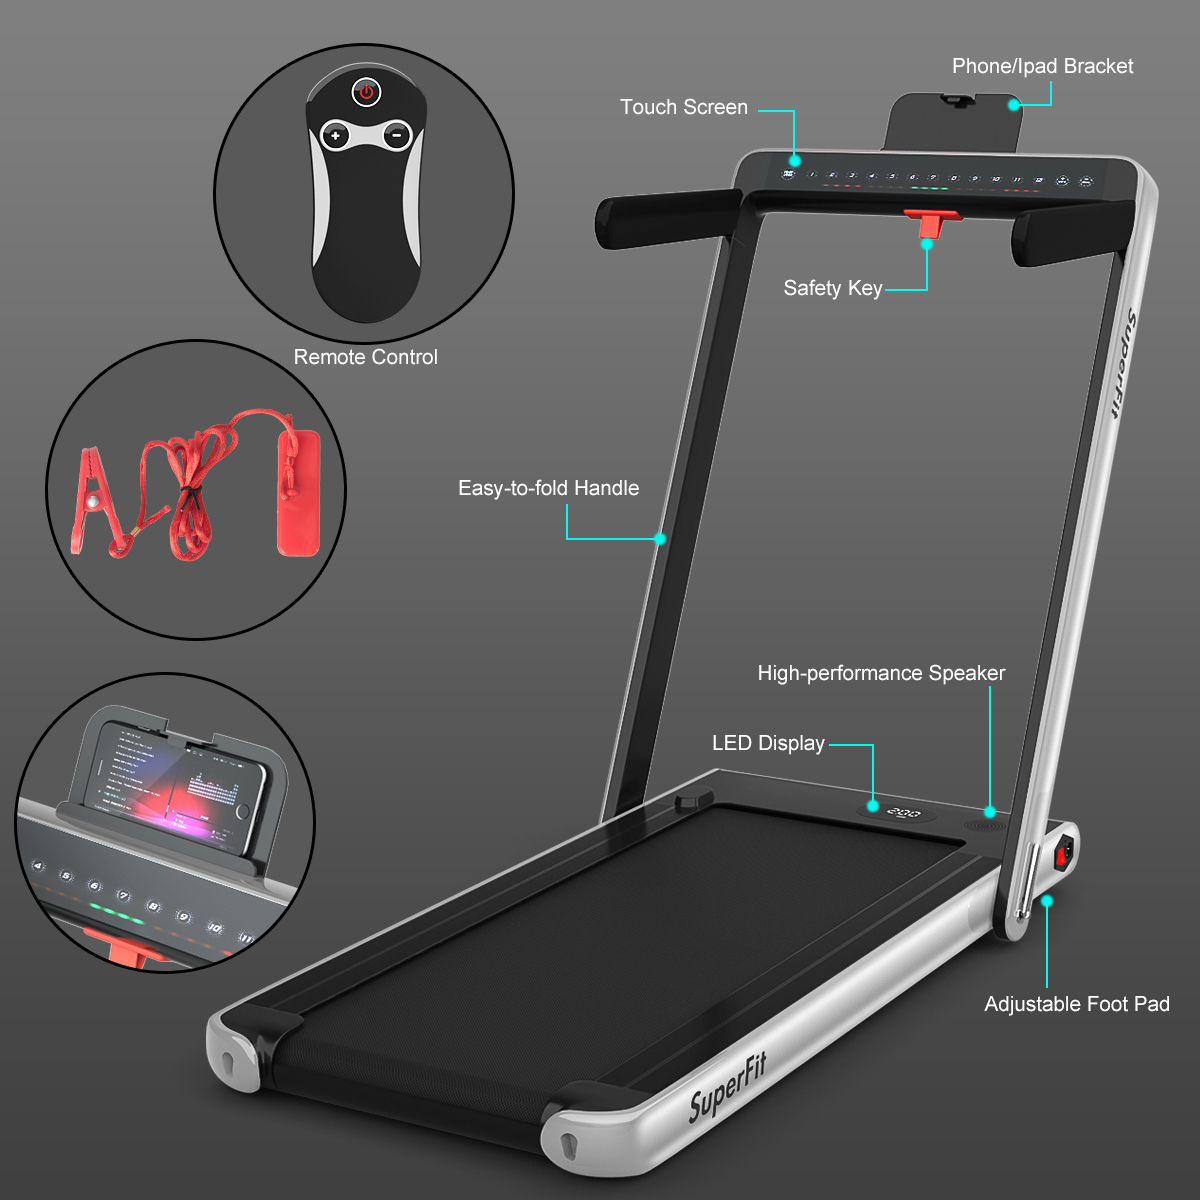 SuperFit Up To 7.5MPH 2.25HP 2 in 1 Dual Display Screen Folding Treadmill Jogging Machine W/APP Control Silver - image 5 of 10